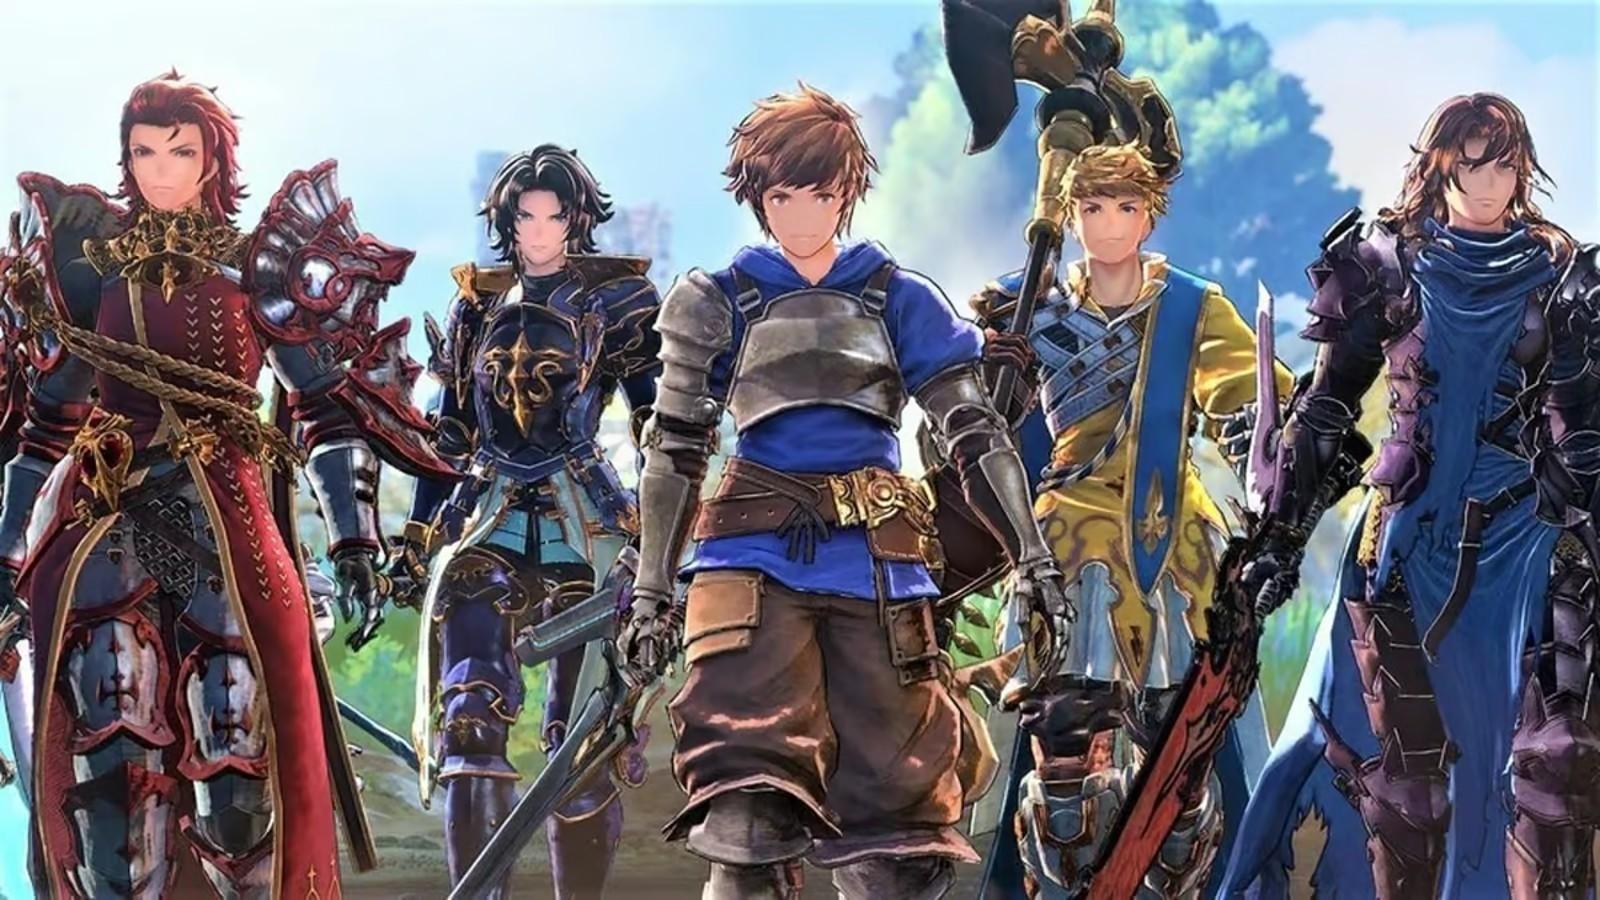 An image of Granblue Fantasy: Relink characters.